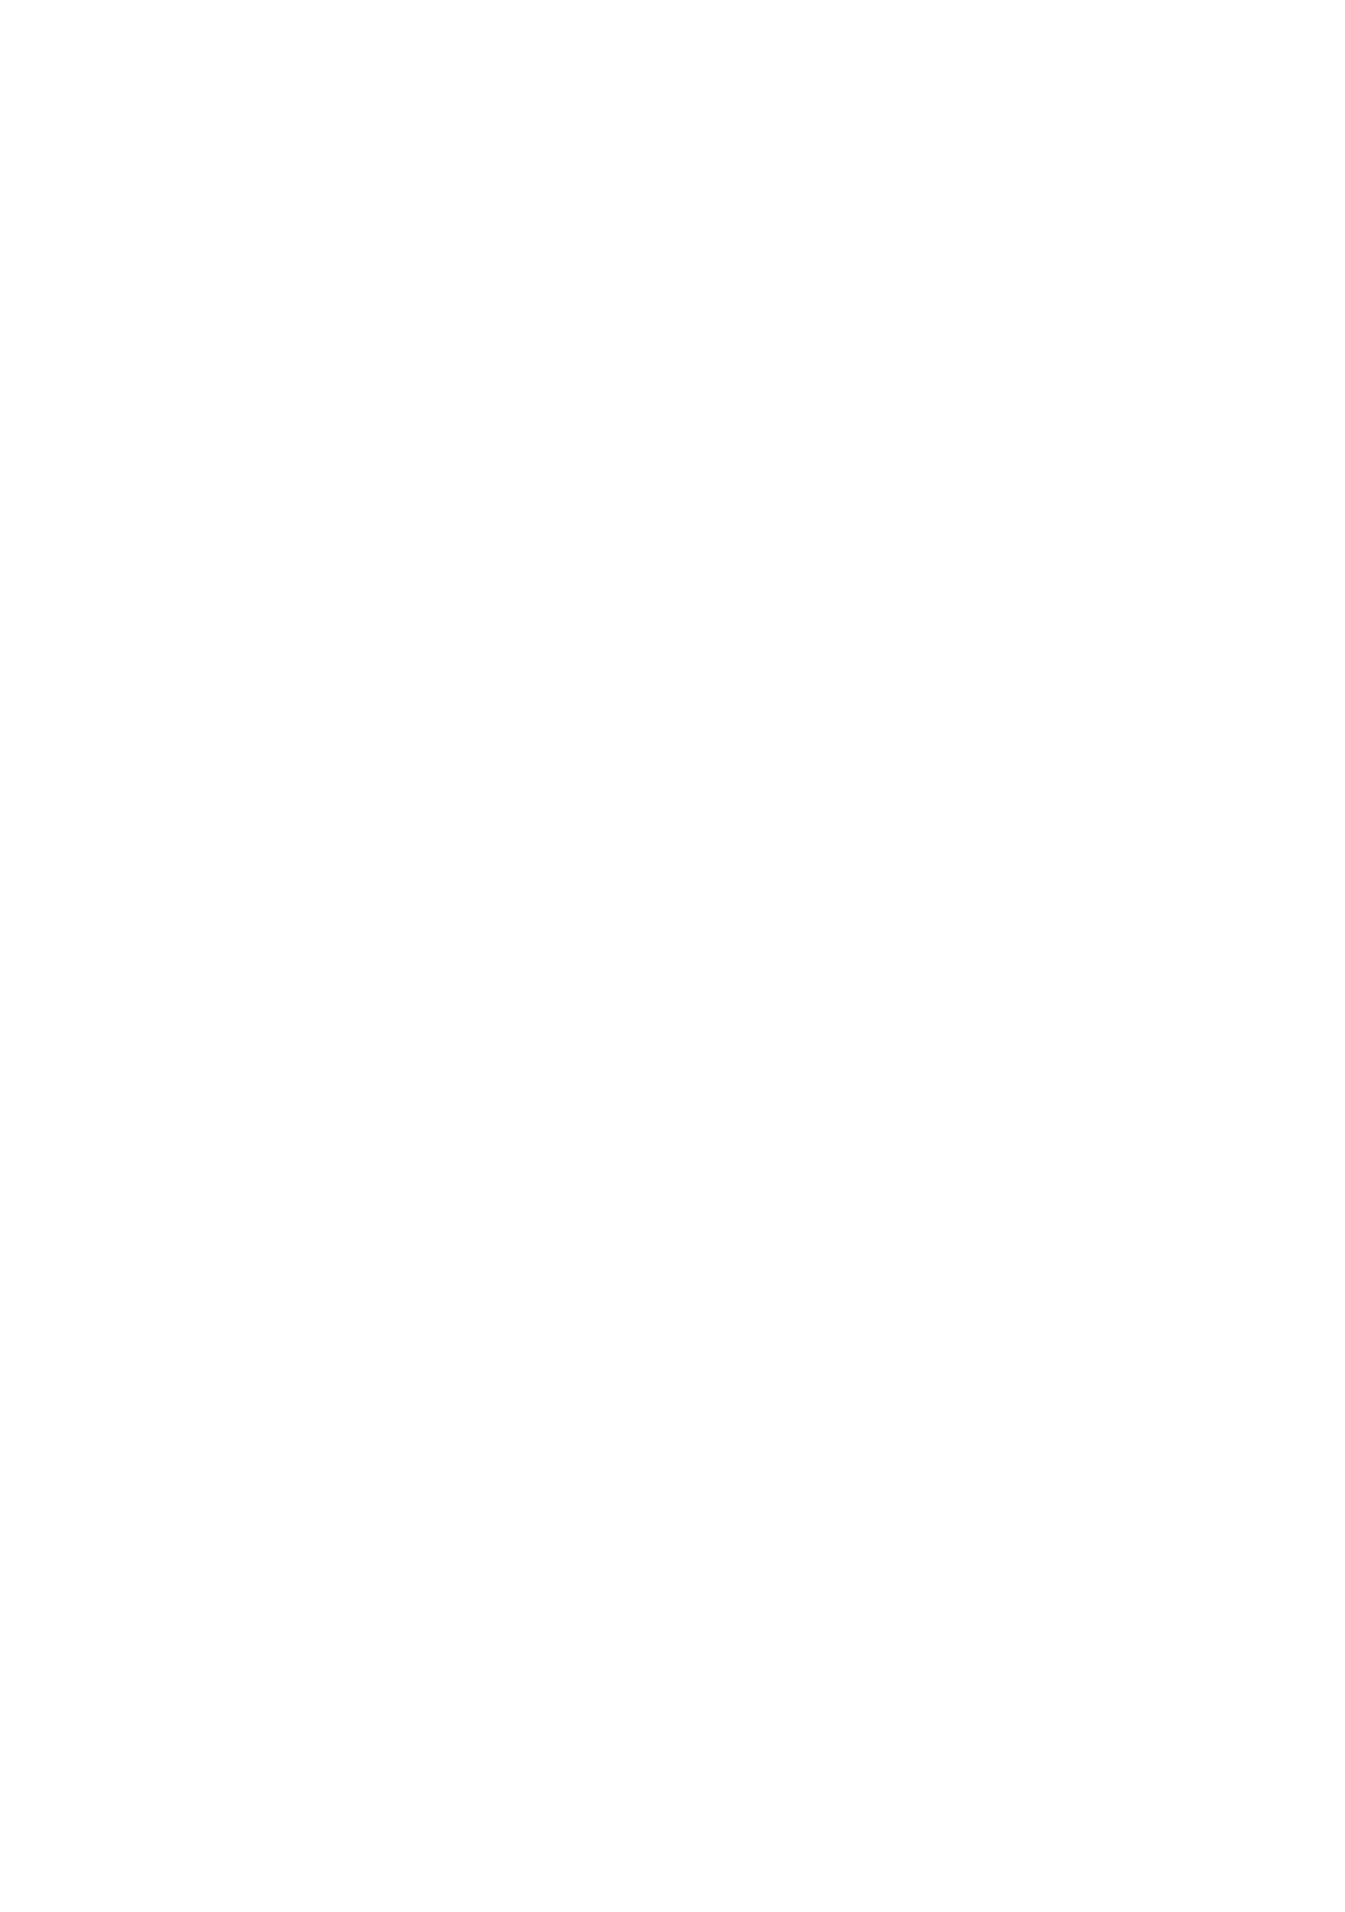 Pradere Office Products